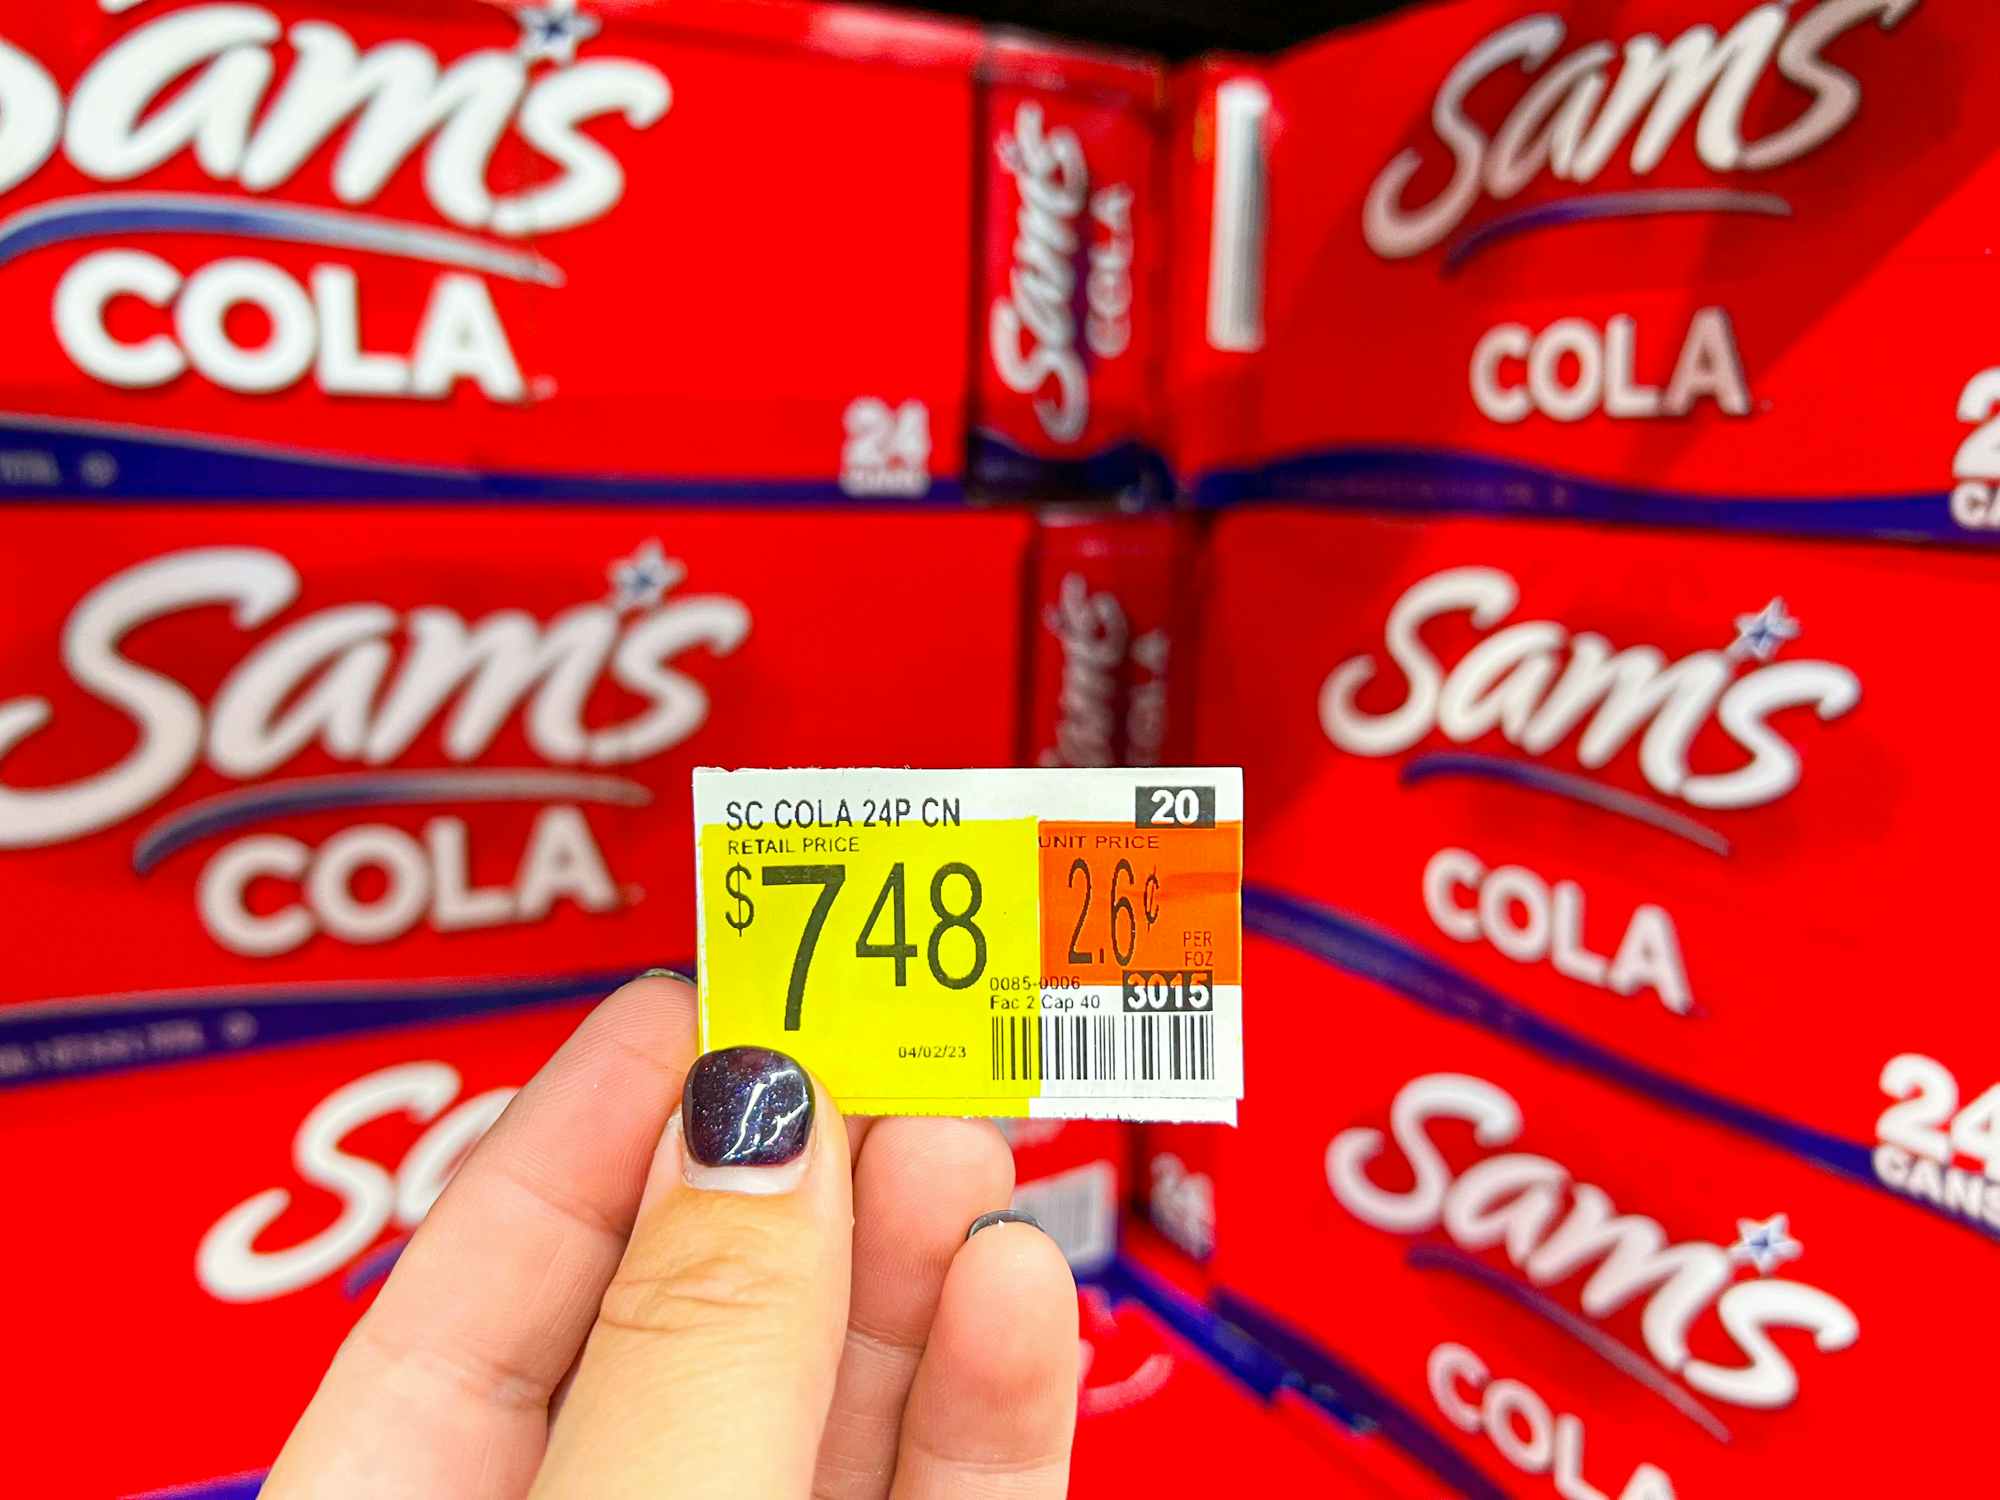 Someone holding a price tag reading $7.48 in front of a shelf of Sam's Cola at Walmart